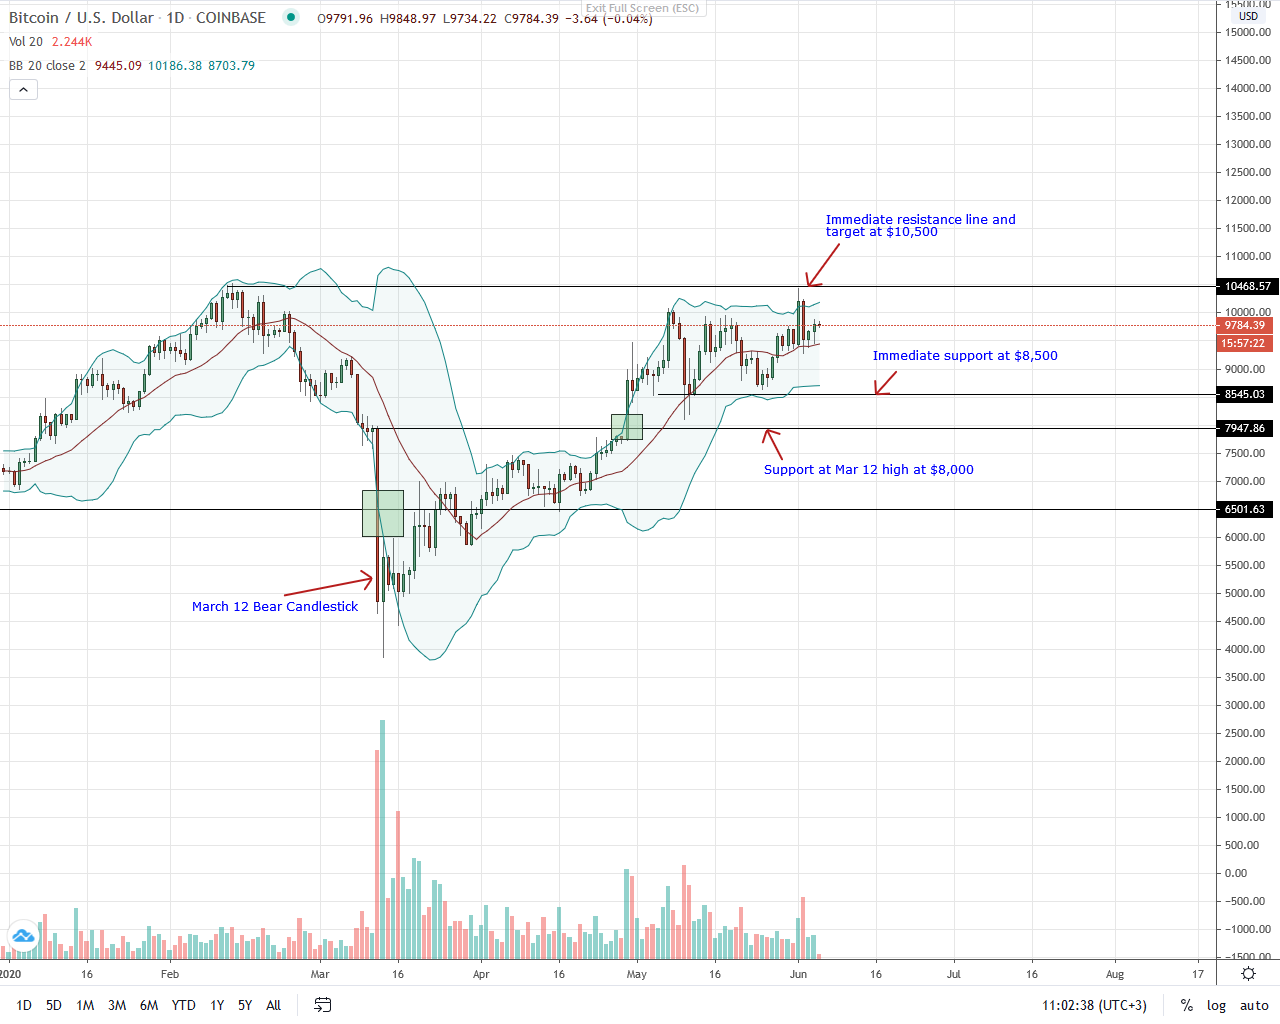 Bitcoin Daily Chart for June 5, 2020